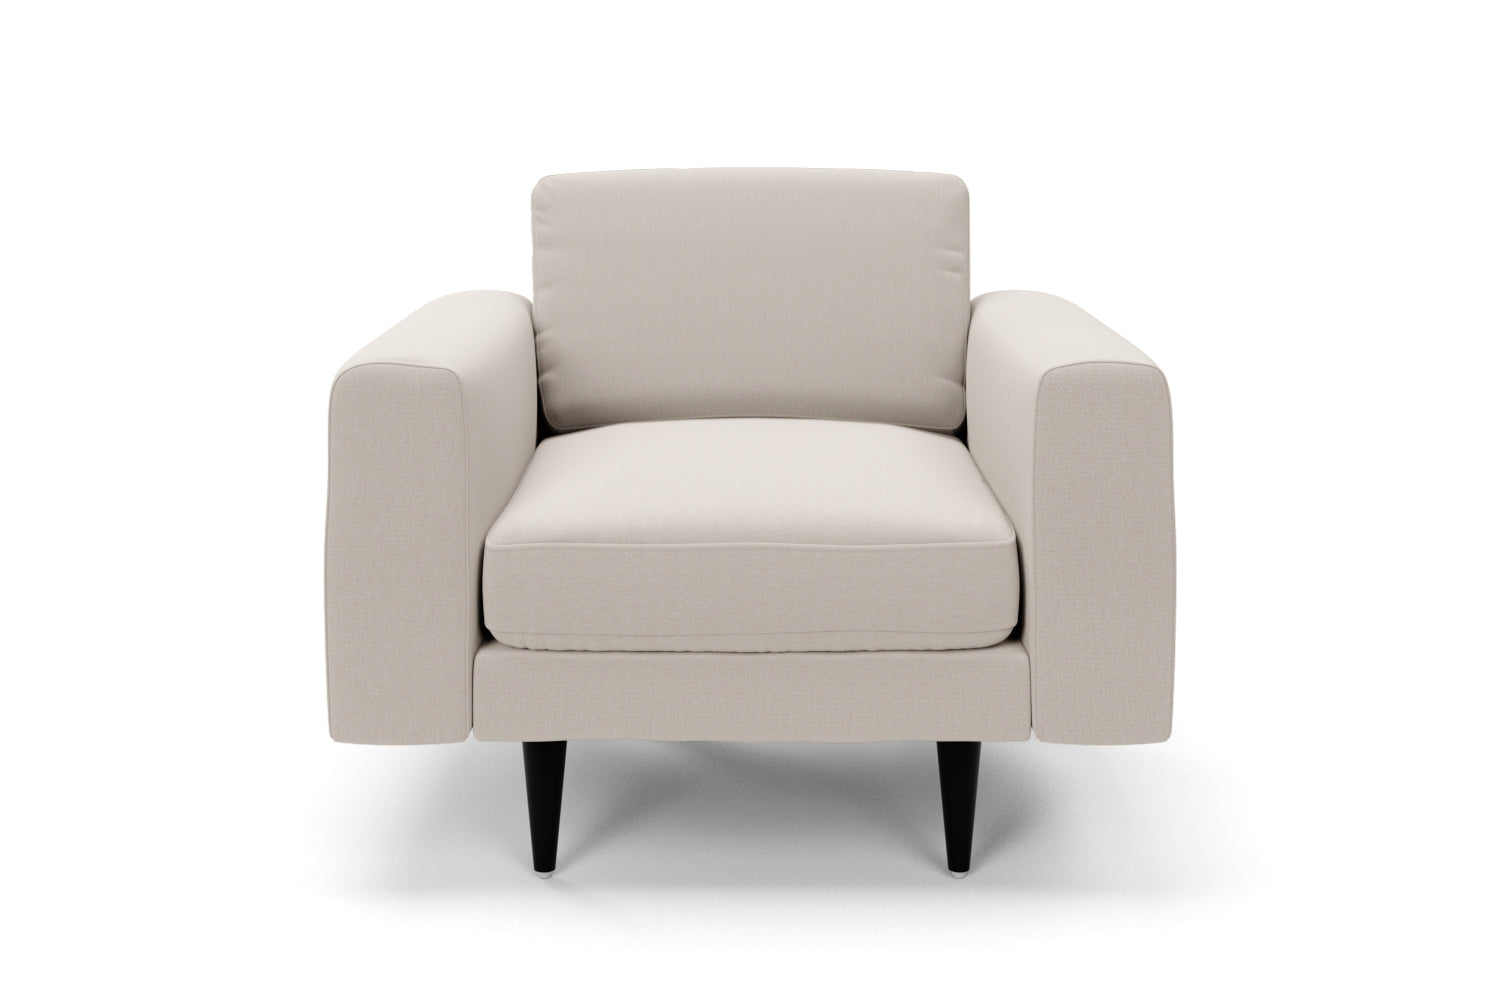 SNUG | The Big Chill 1 Seater Armchair in Biscuit variant_40520422391856